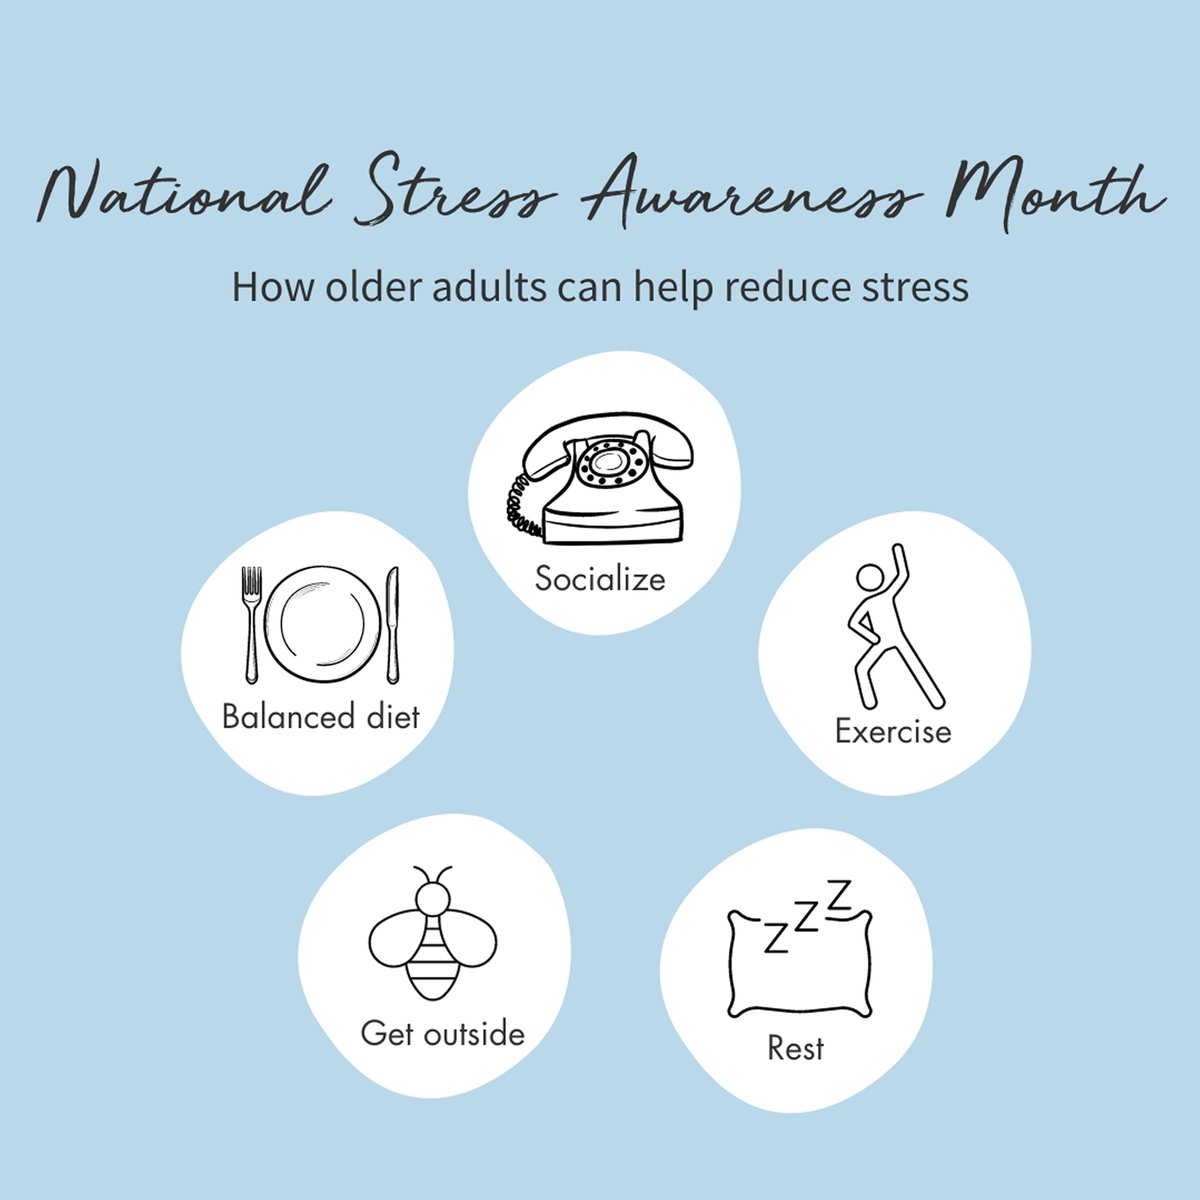 April is National Stress Awareness Month, and we all experience stress. Common remedies include going outdoors, exercising, sleeping and eating right, and spending time with others. How do you manage stress? #StressAwarenessMonth #SonidaSeniorLiving #FindYourJoyHere